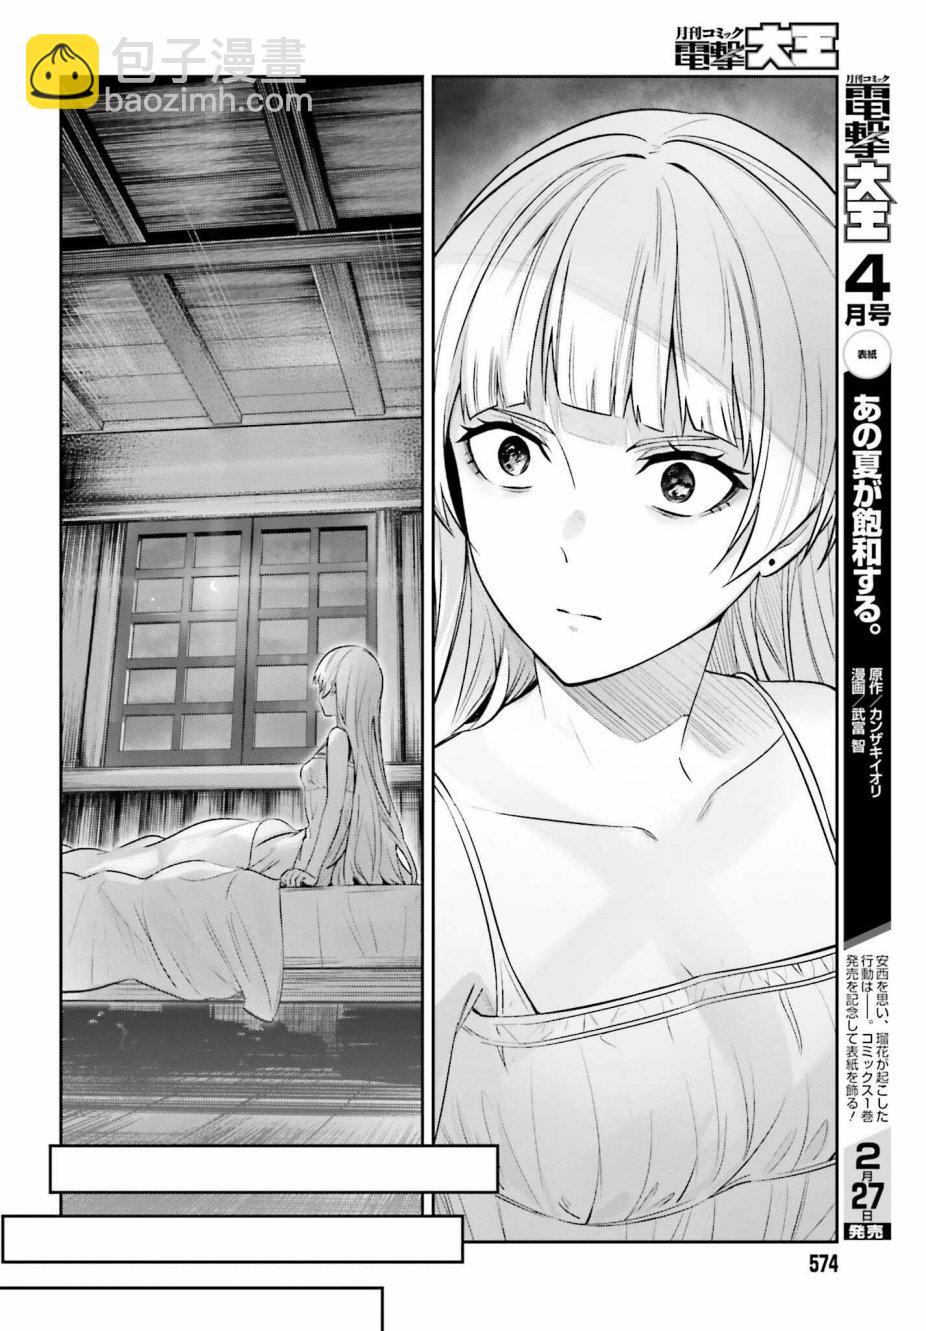 Unnamed Memory - 第24話 - 6